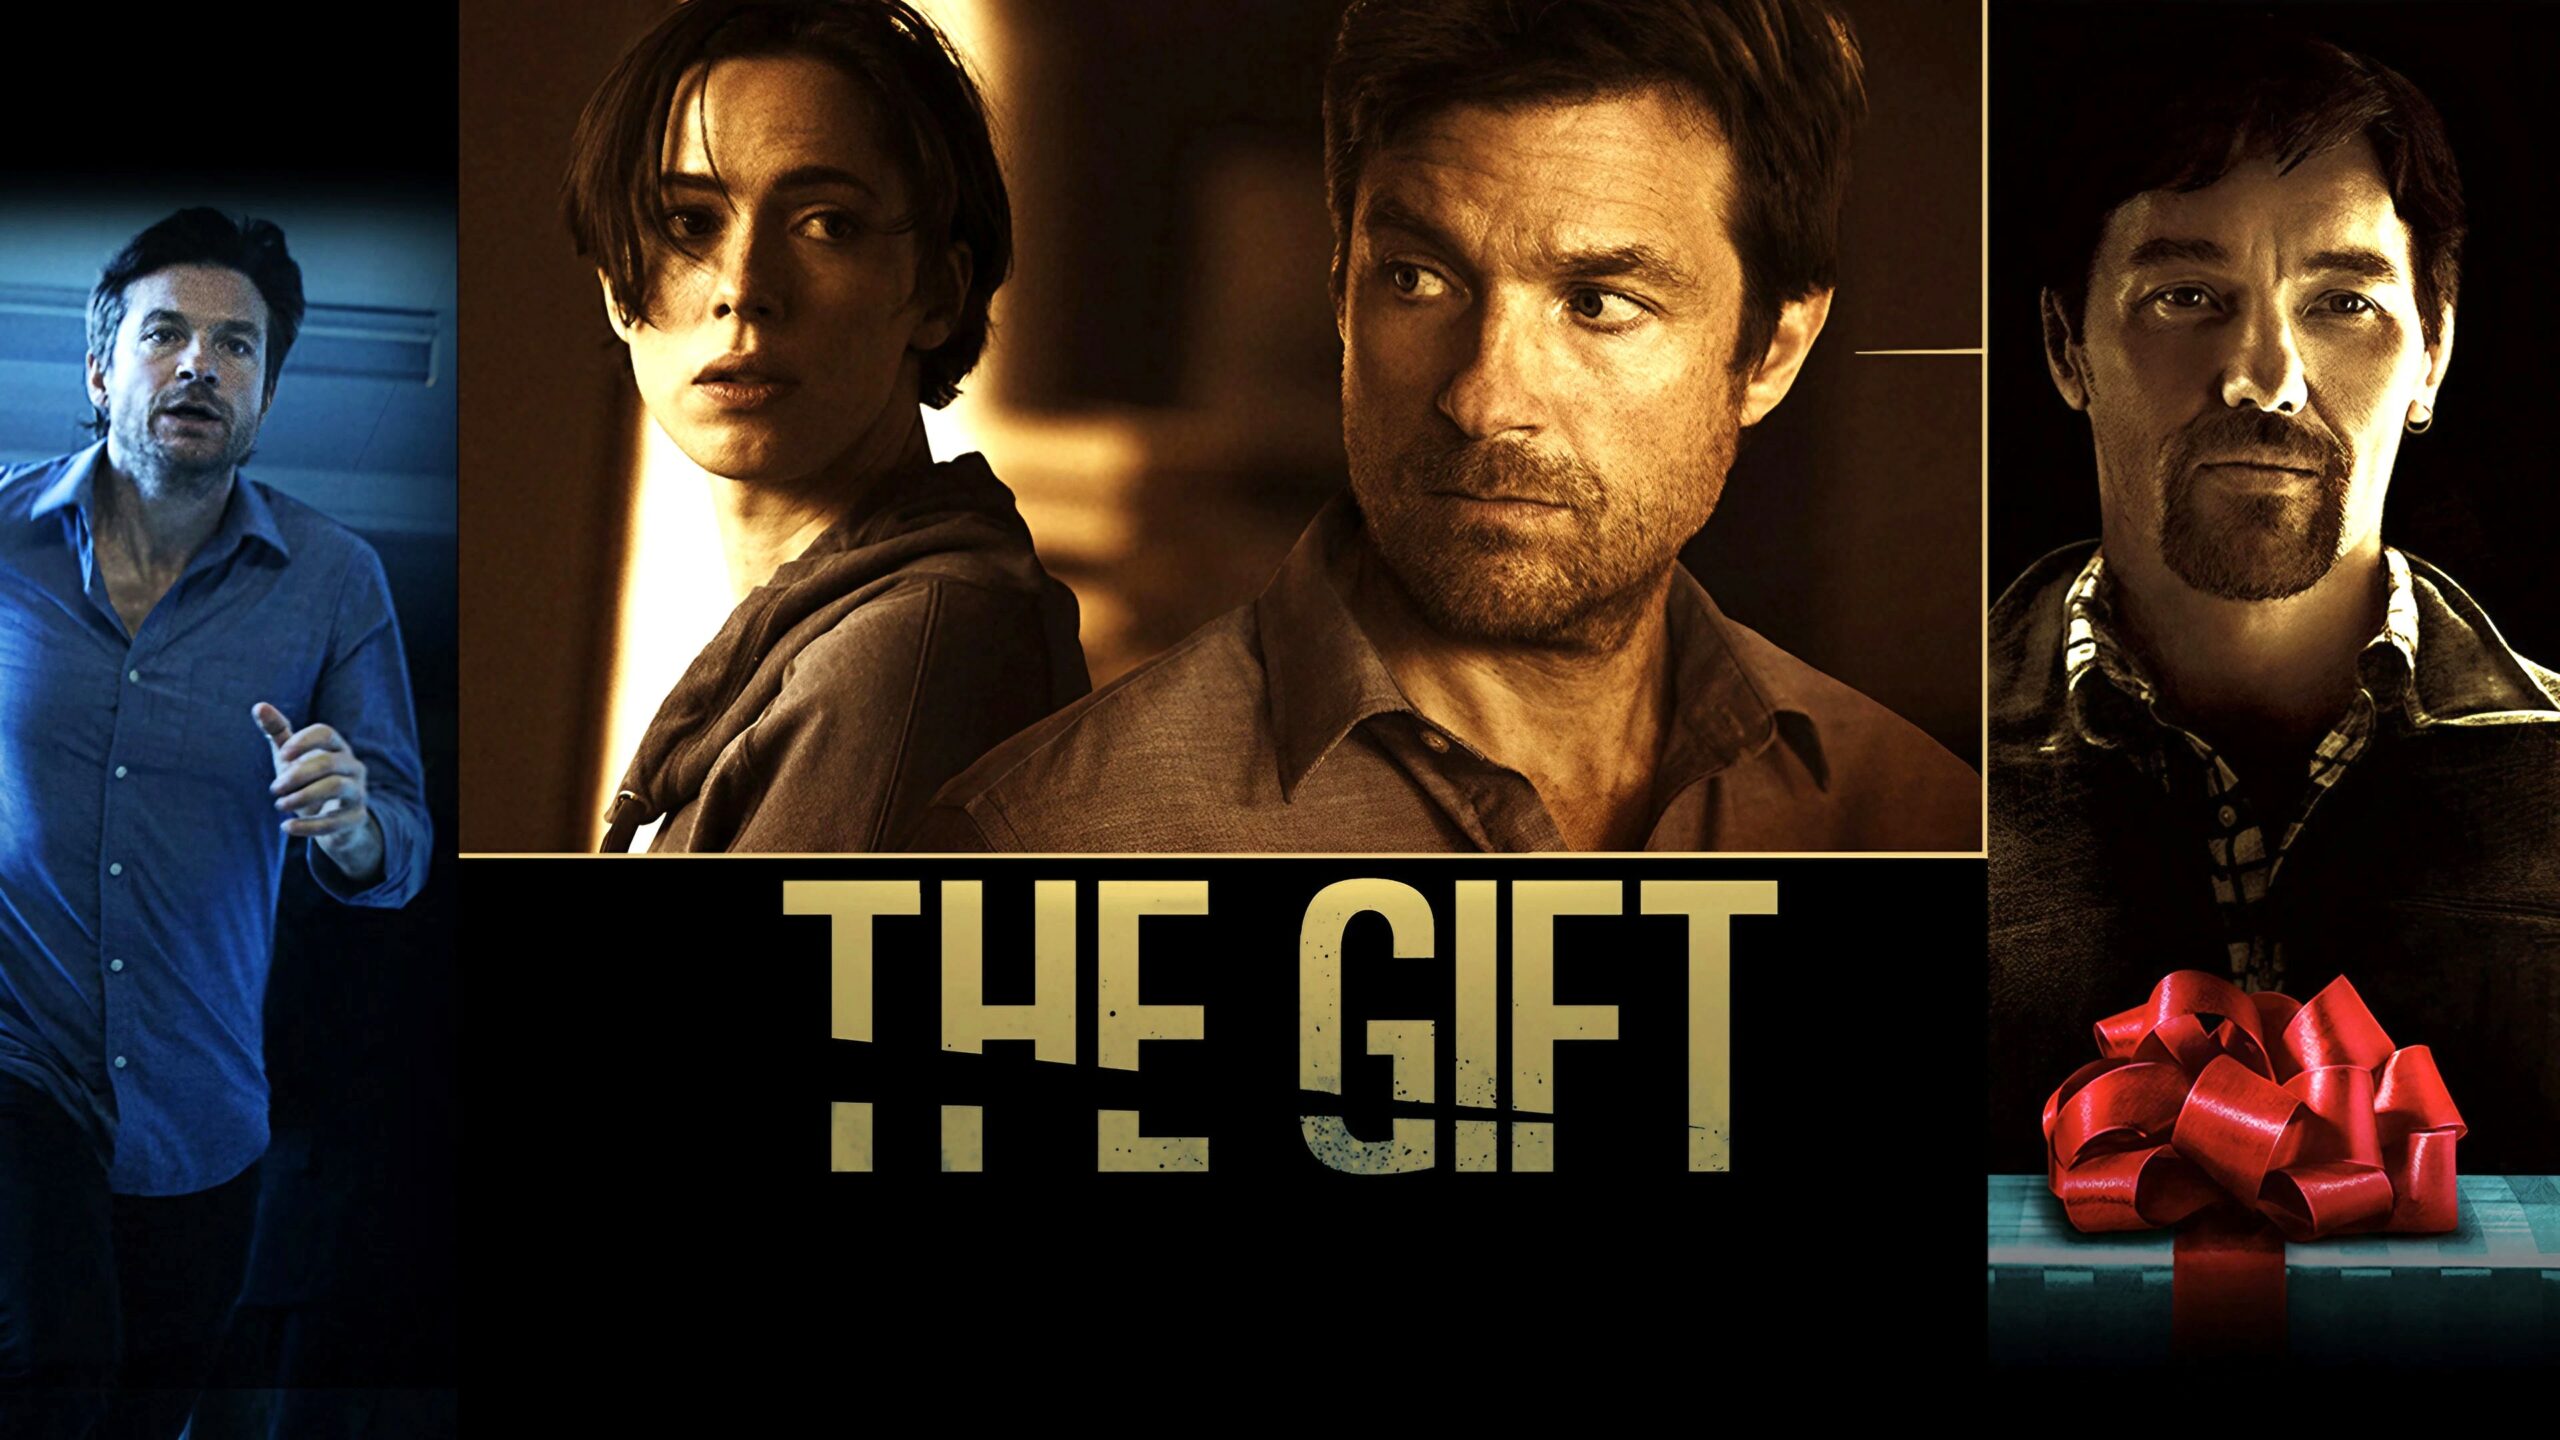 The Gift Is the 2015 Thriller Movie Inspired by True Events